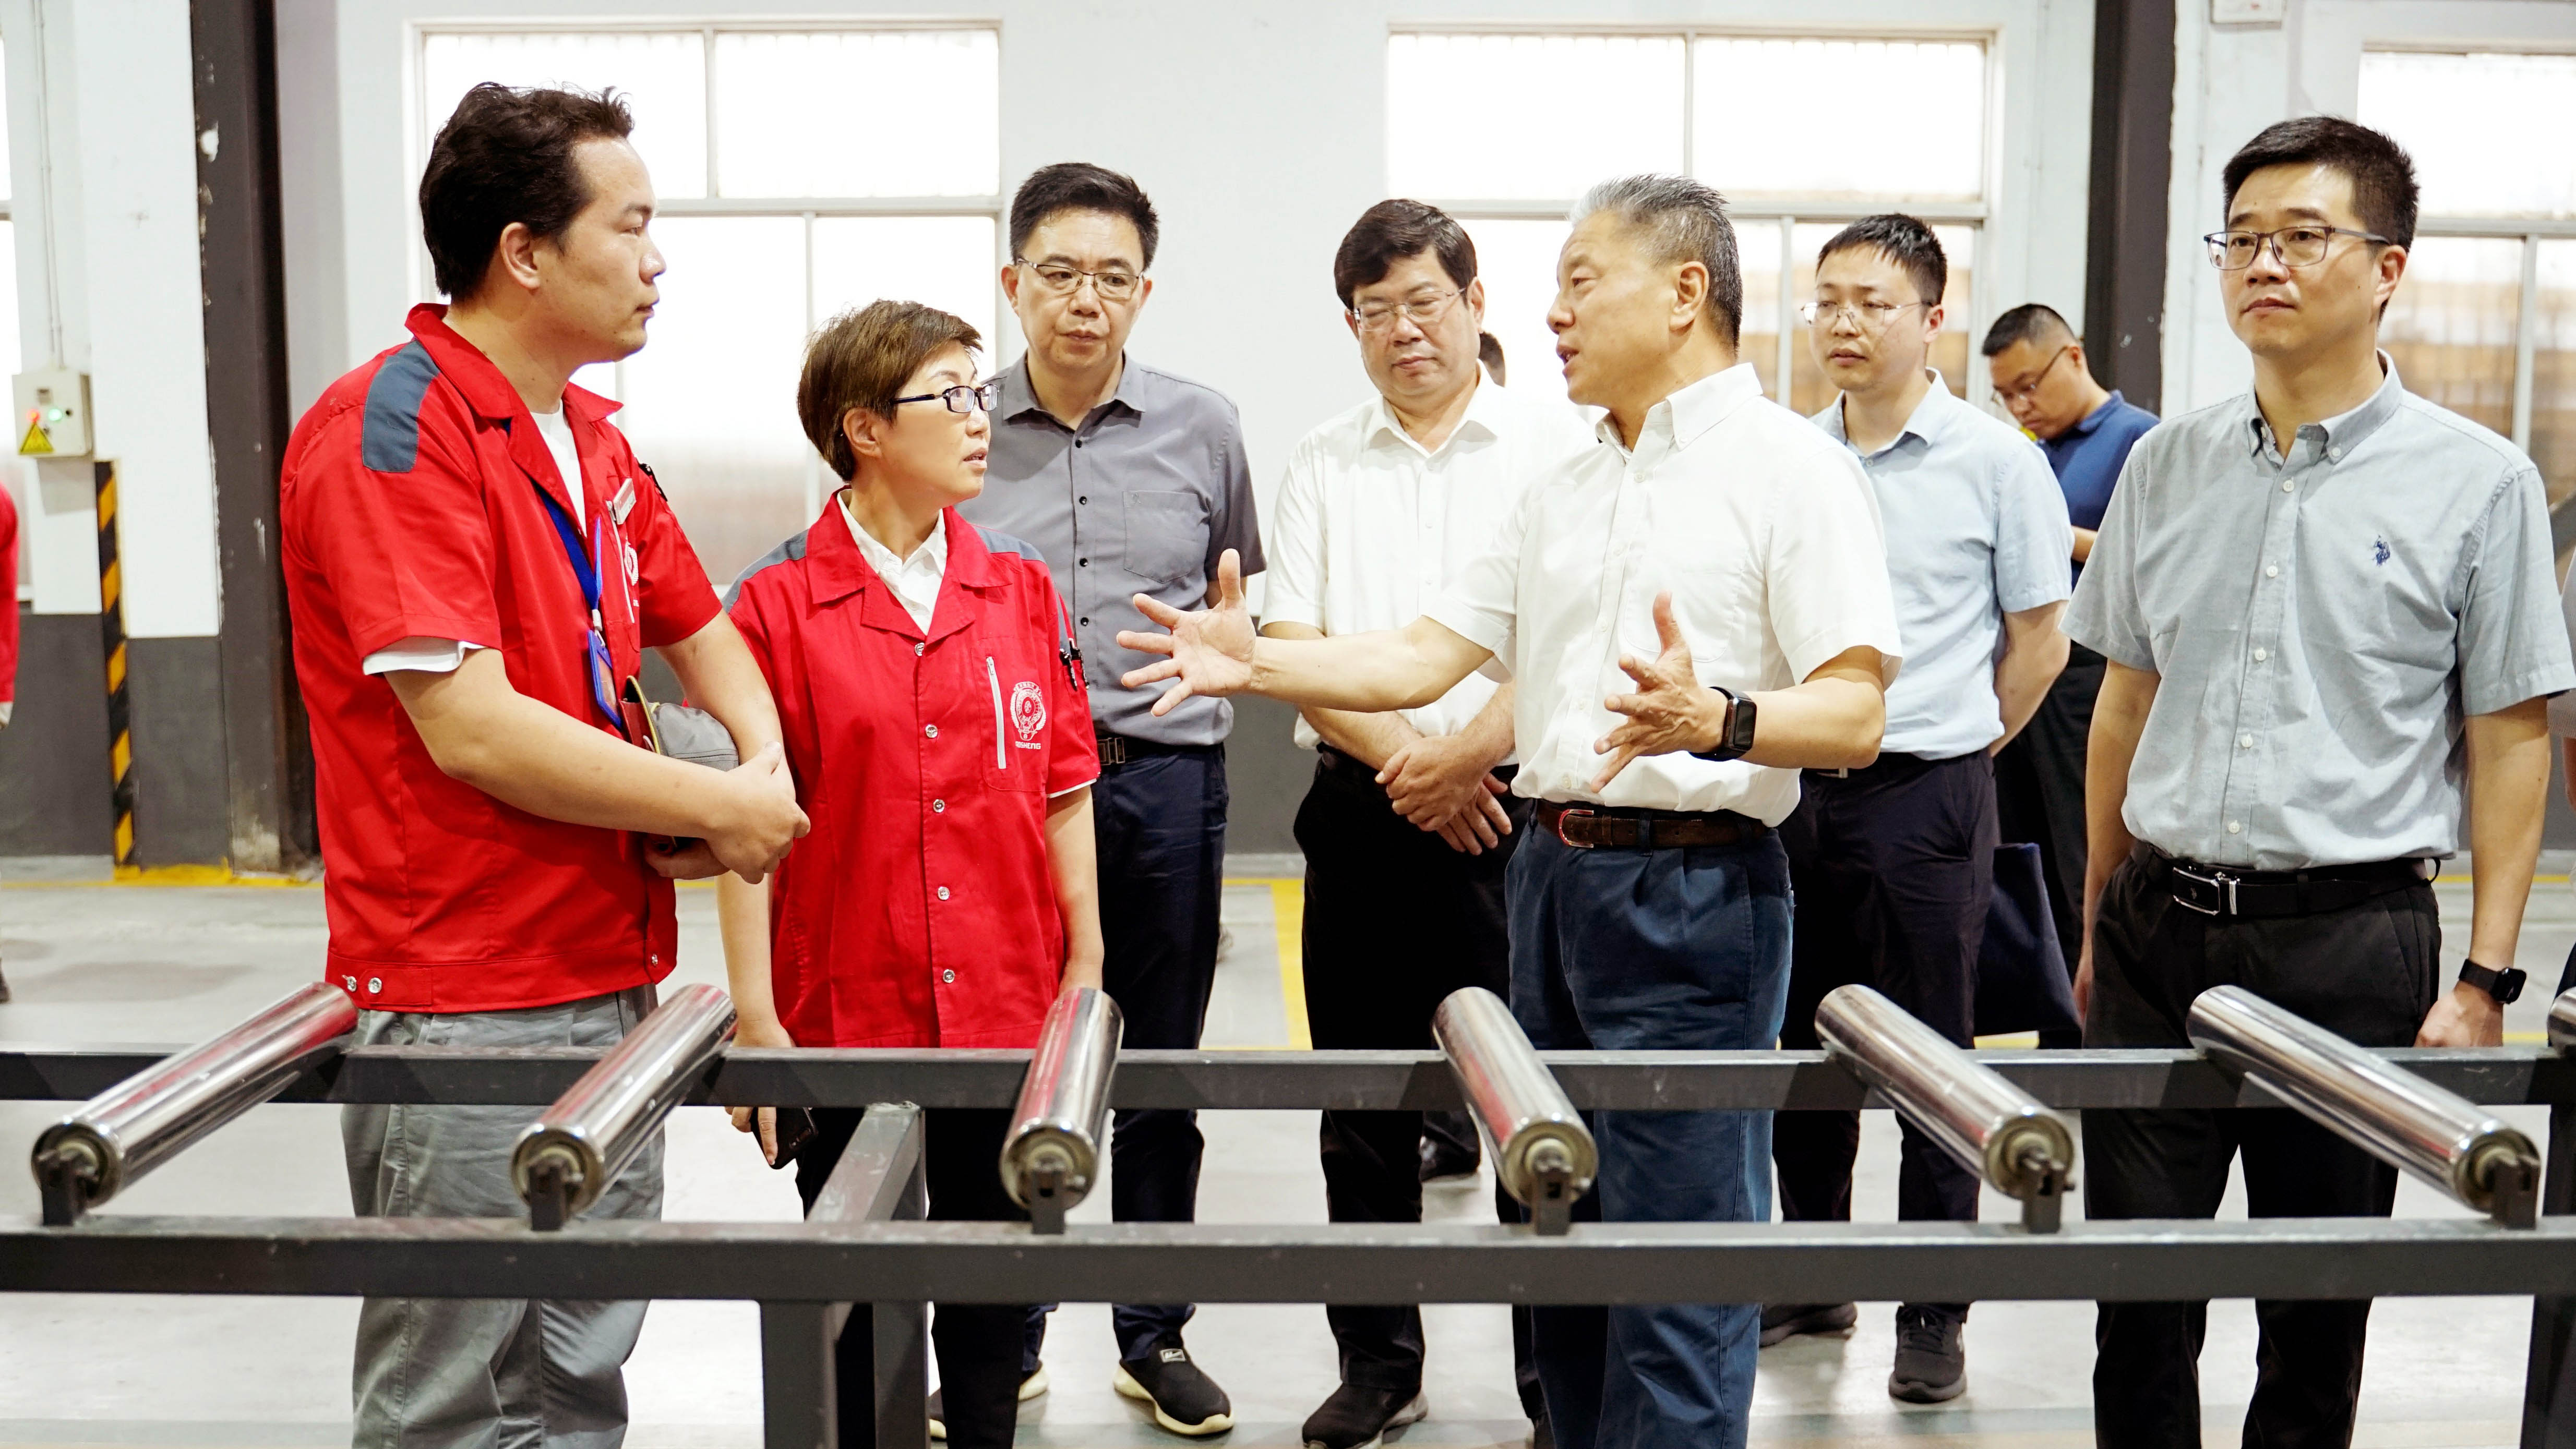 Yang Zhiping, Deputy Director of the Standing Committee of the Suzhou Municipal Peoples Congress, visited and investigated Ausheng Technology